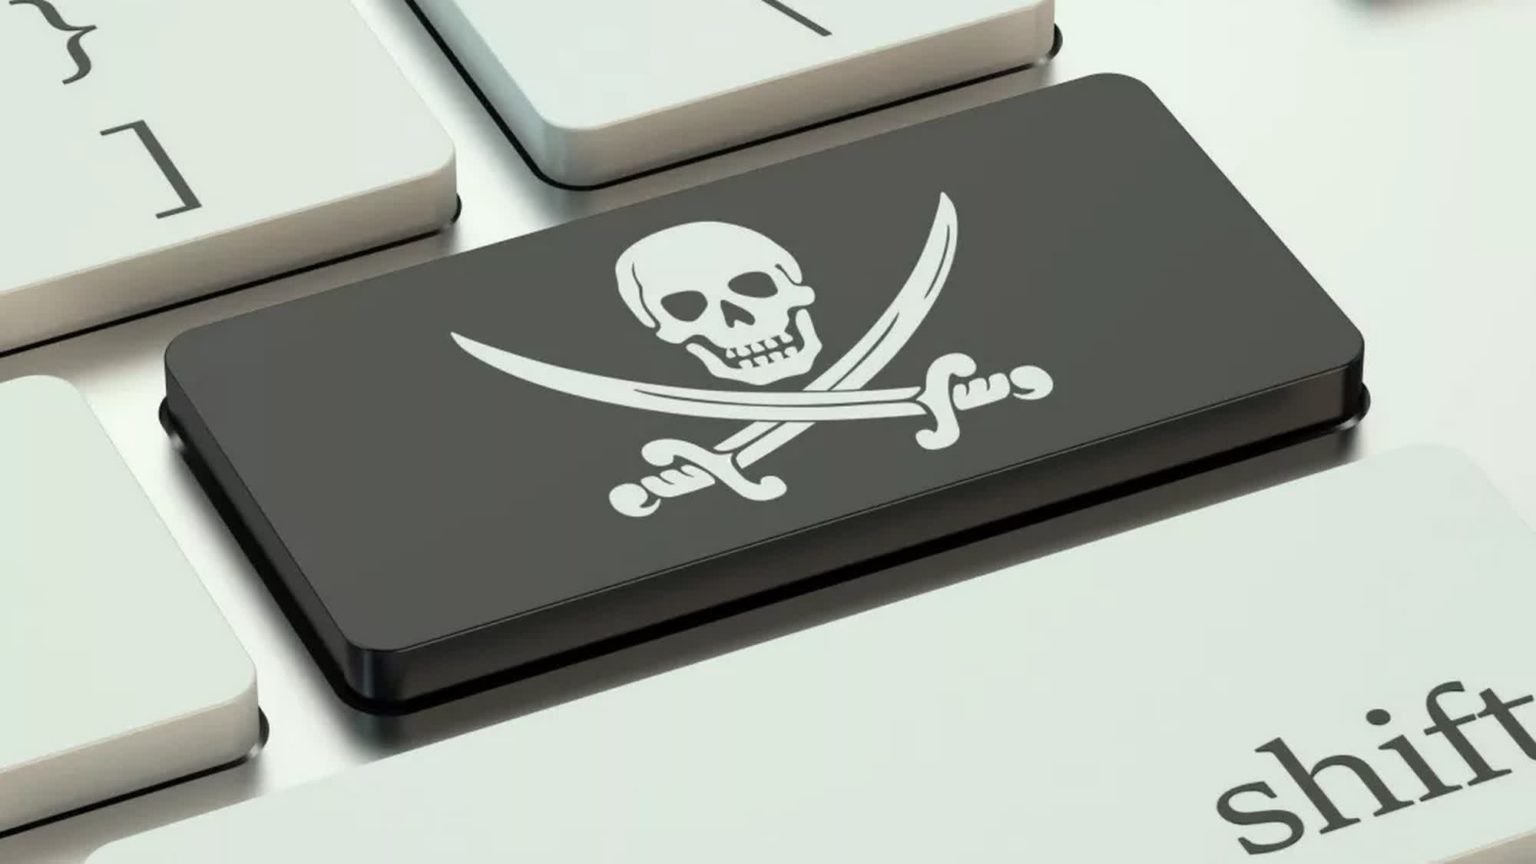 Anti-piracy warnings have the opposite effect on men, new study says